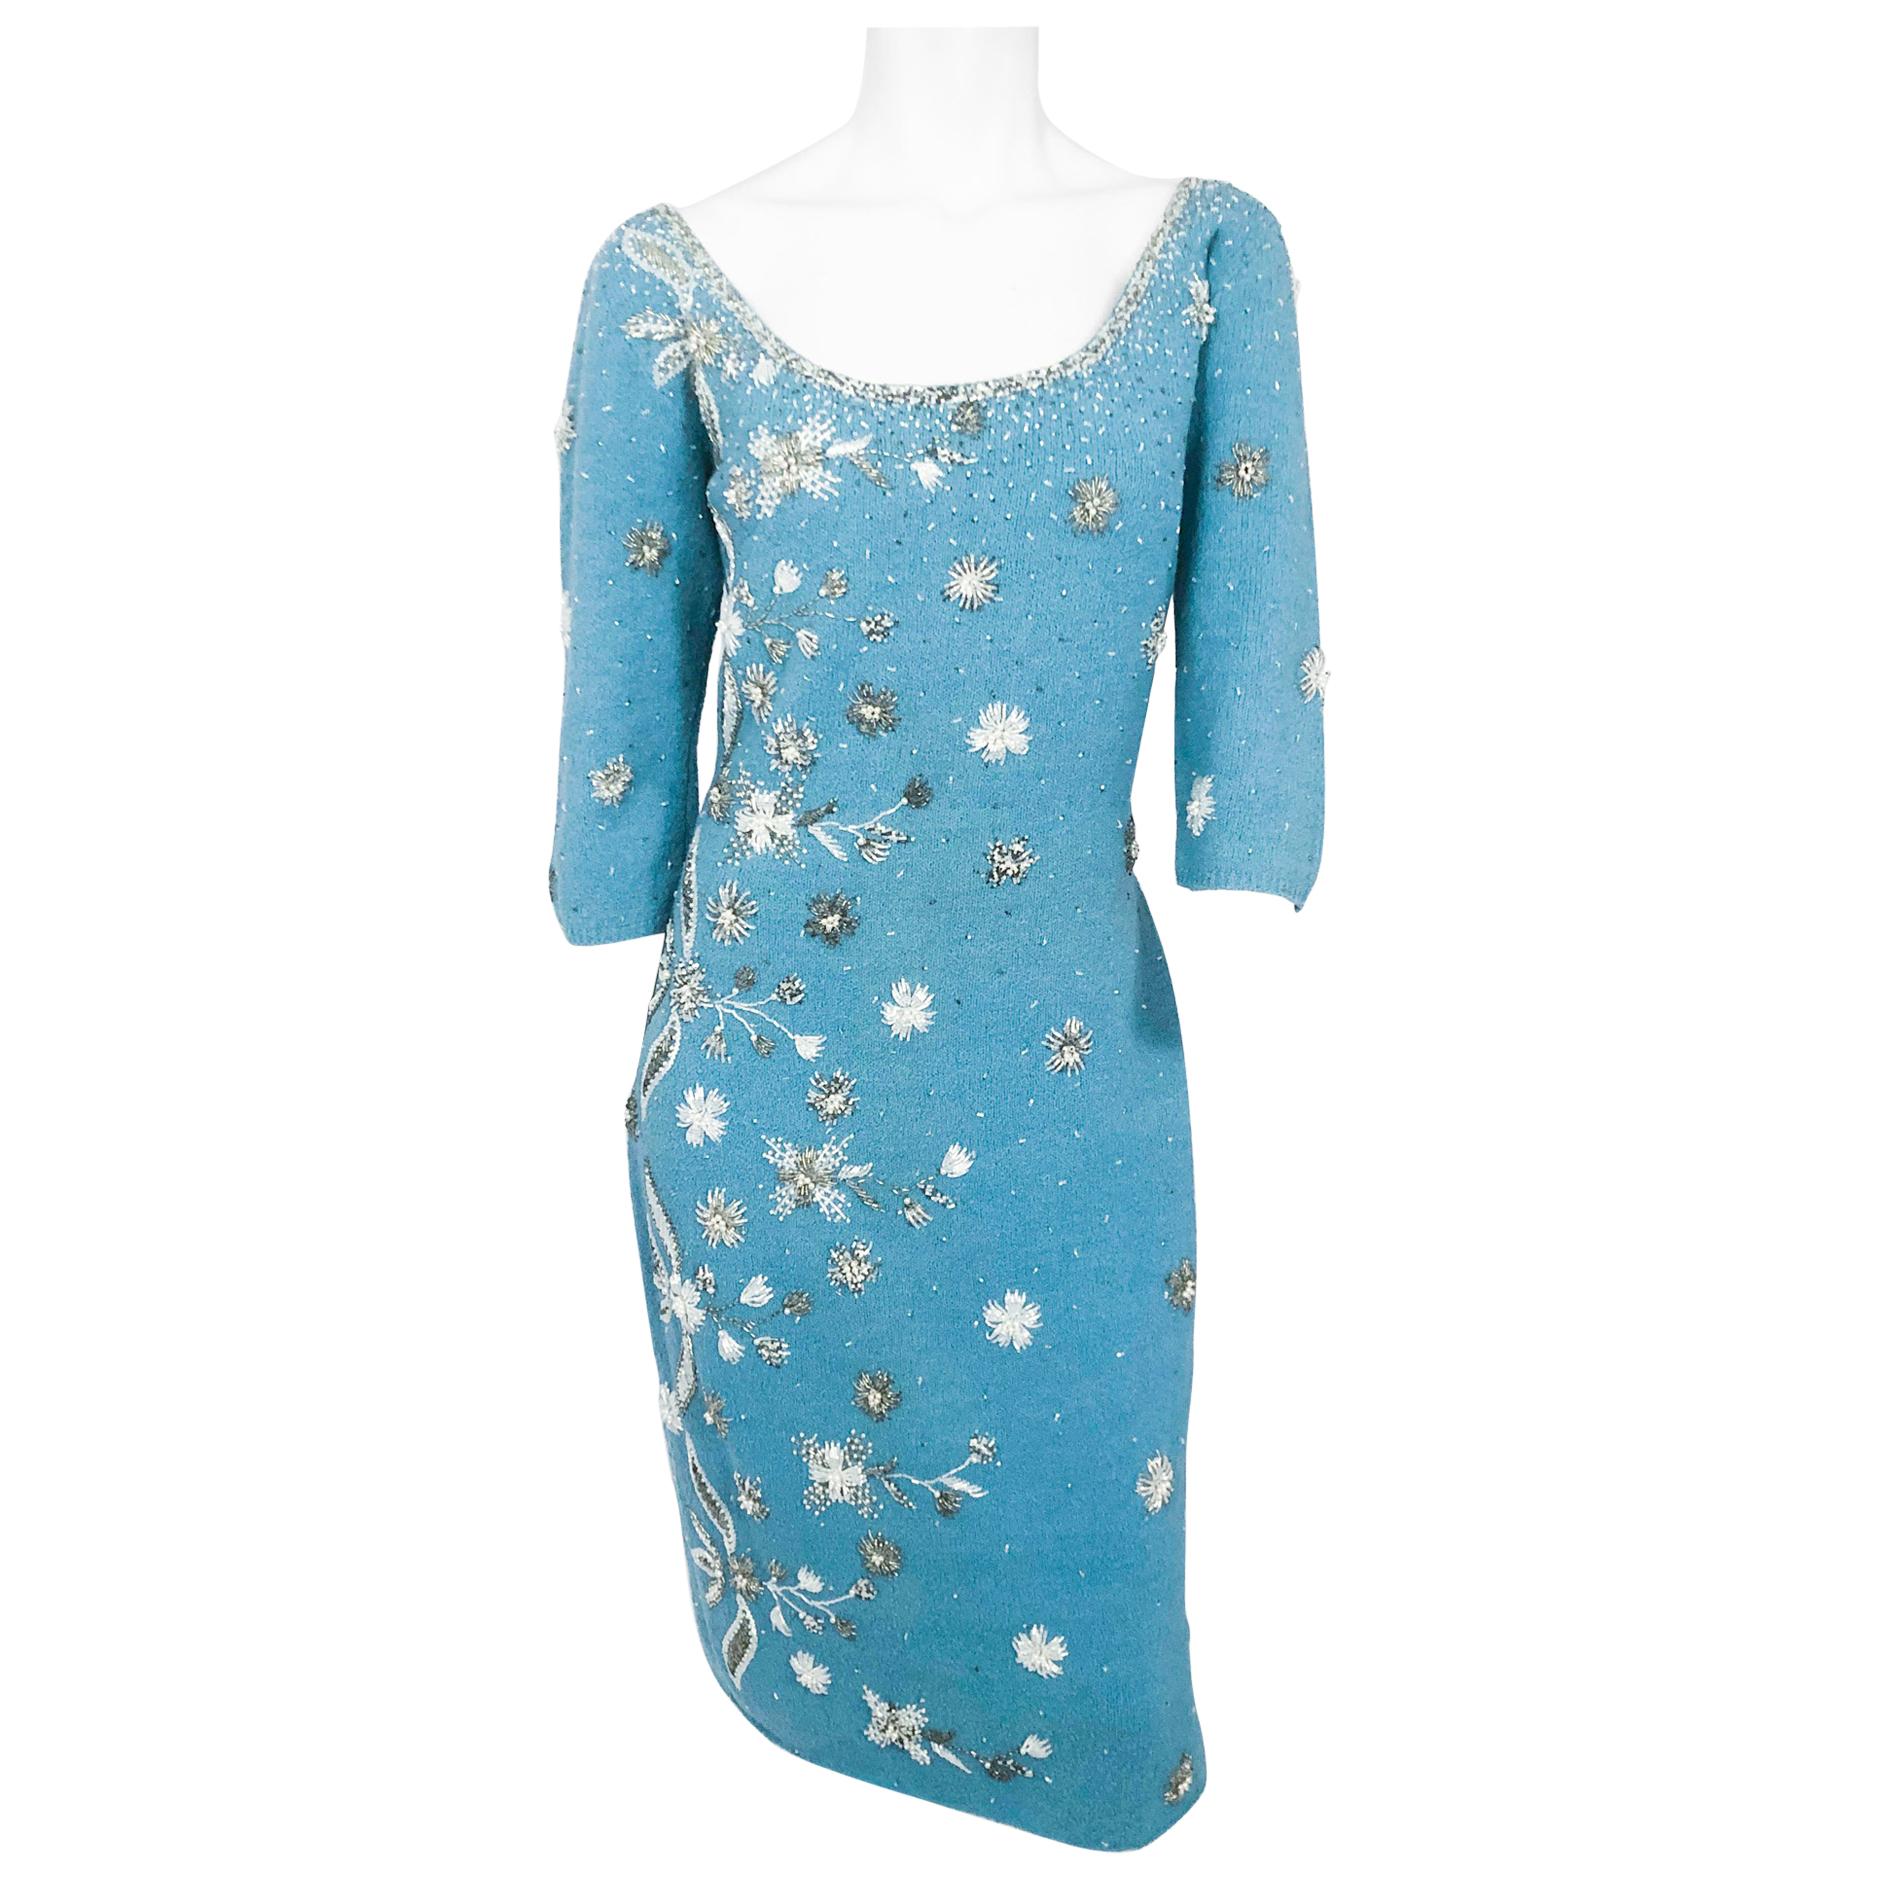 1950s Aqua Knit Dress with Hand Beading Accents For Sale